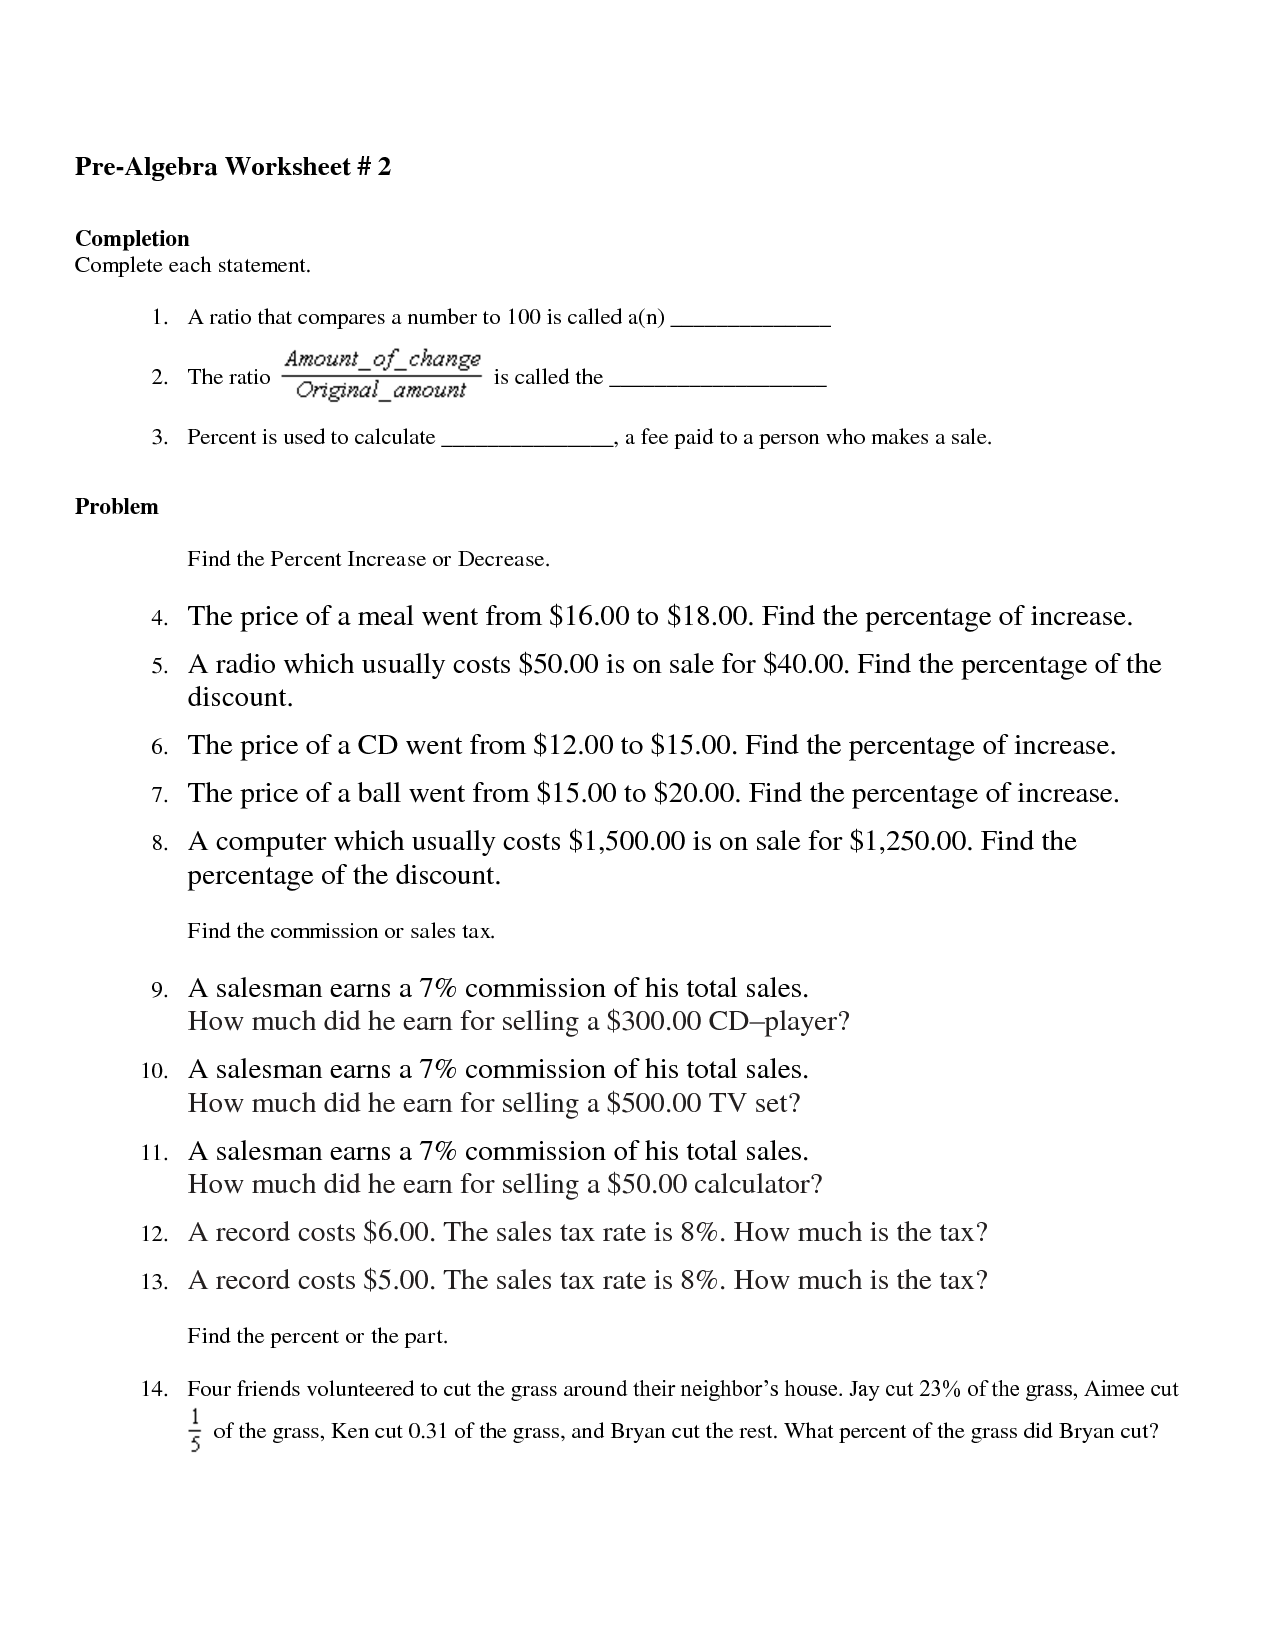 17 Best Images of Percent Increase Or Decrease Worksheet  Percent Tax Tip Discount Word 